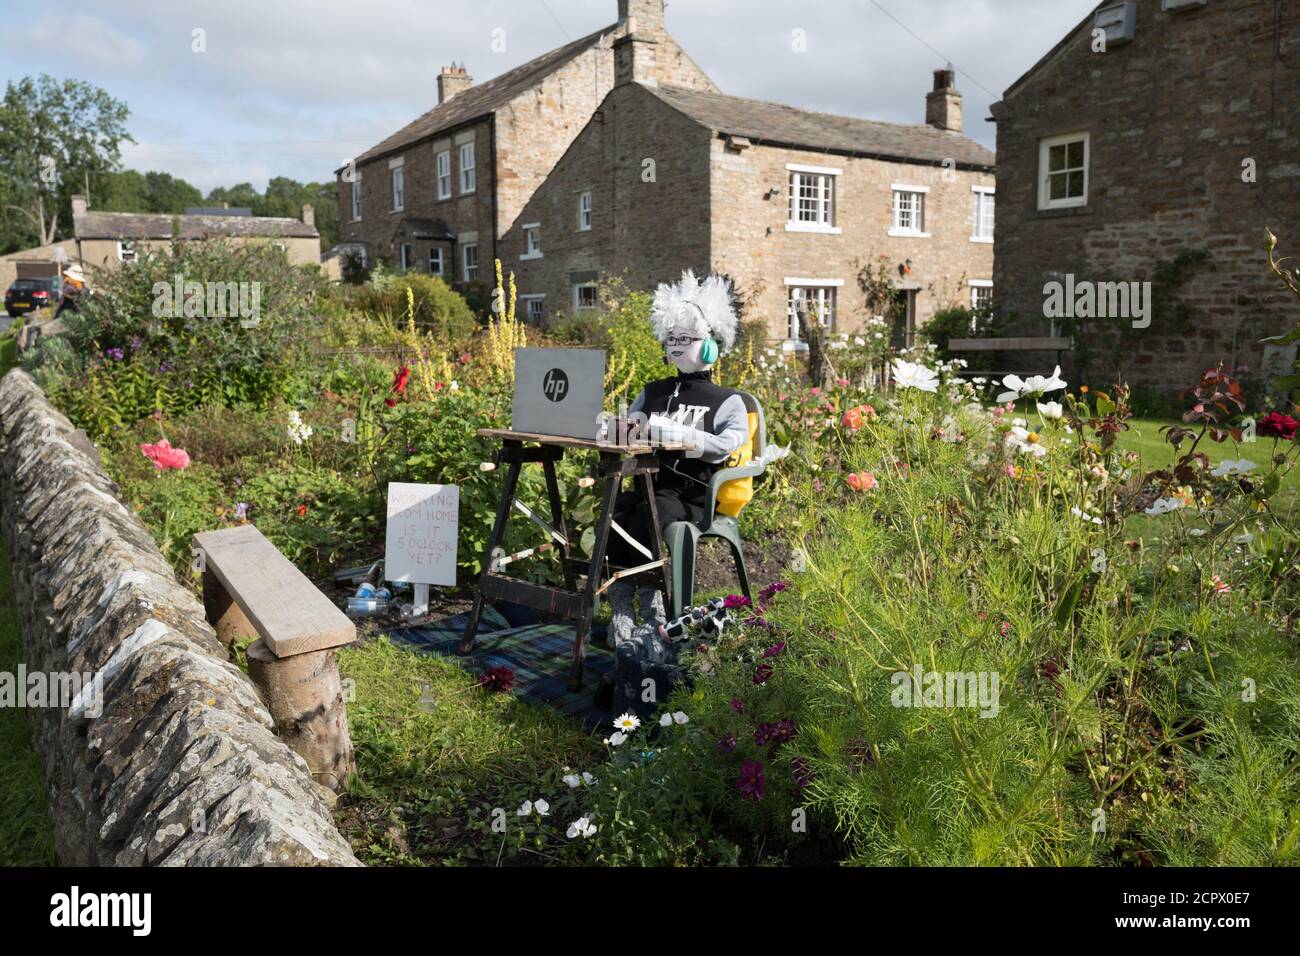 Redmire, Yorkshire Dales, England, UK. 19th Sep, 2020. This years theme for the Yorkshire Dales village of Redmire annual scarecrow competition being Covid 19 and the Lockdown. Due to the Covid 19 virus, virtual judging took place to select the winning scarecrow. The female scarecrow at the sowing machine making face masks was declared the winning. Credit: Alan Beastall/Alamy Live News. Stock Photo